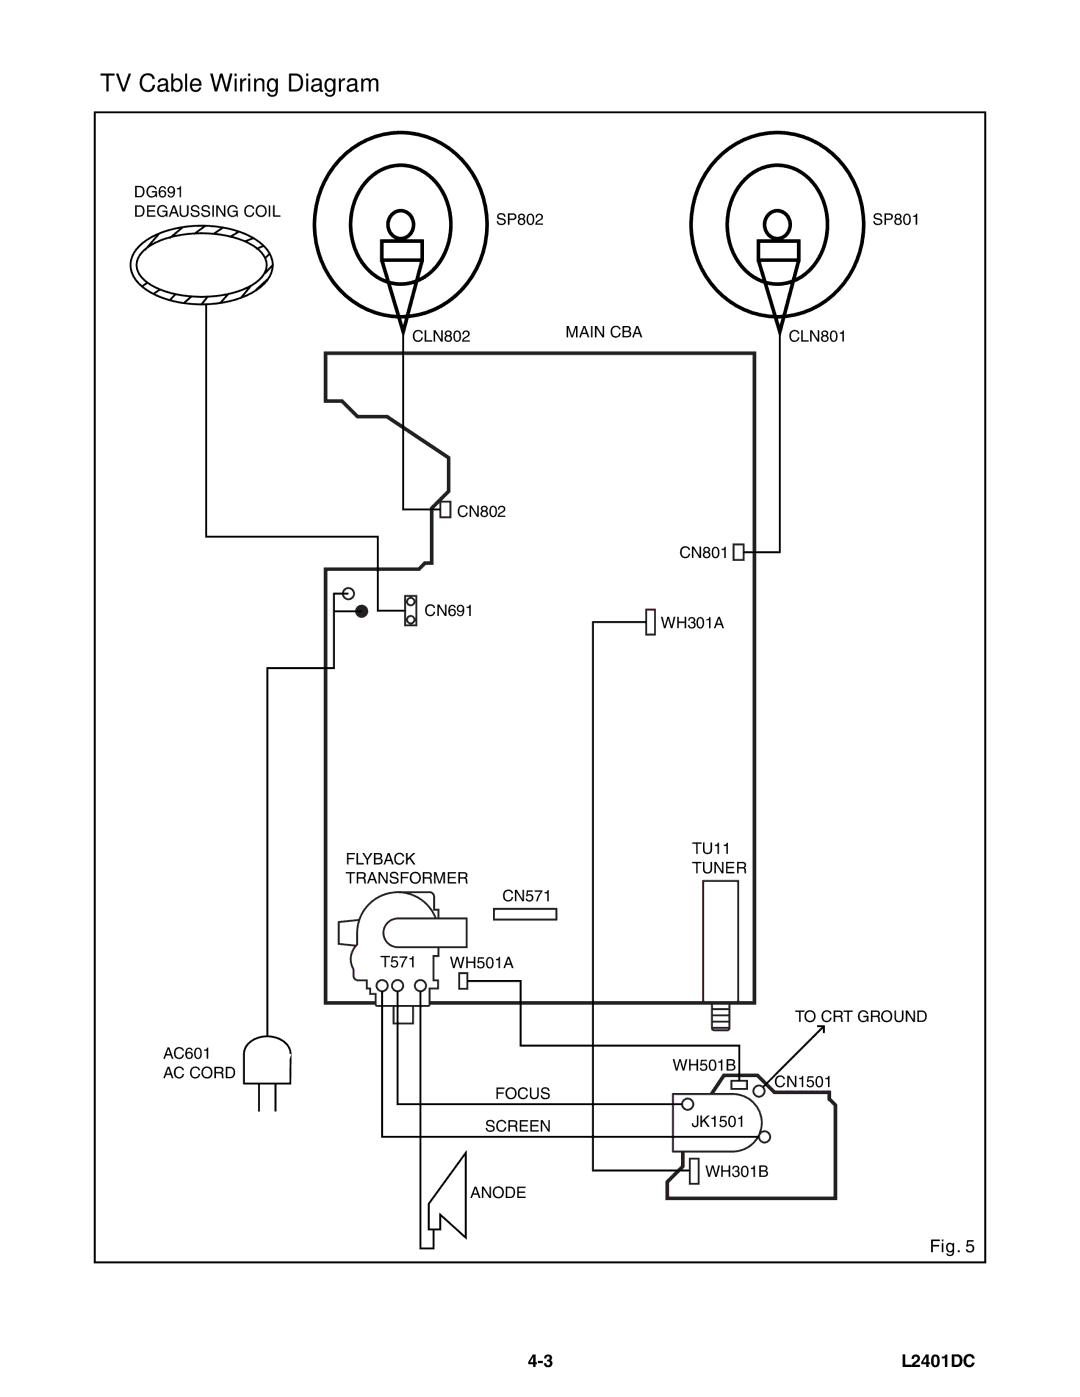 Emerson 6420FE service manual TV Cable Wiring Diagram 